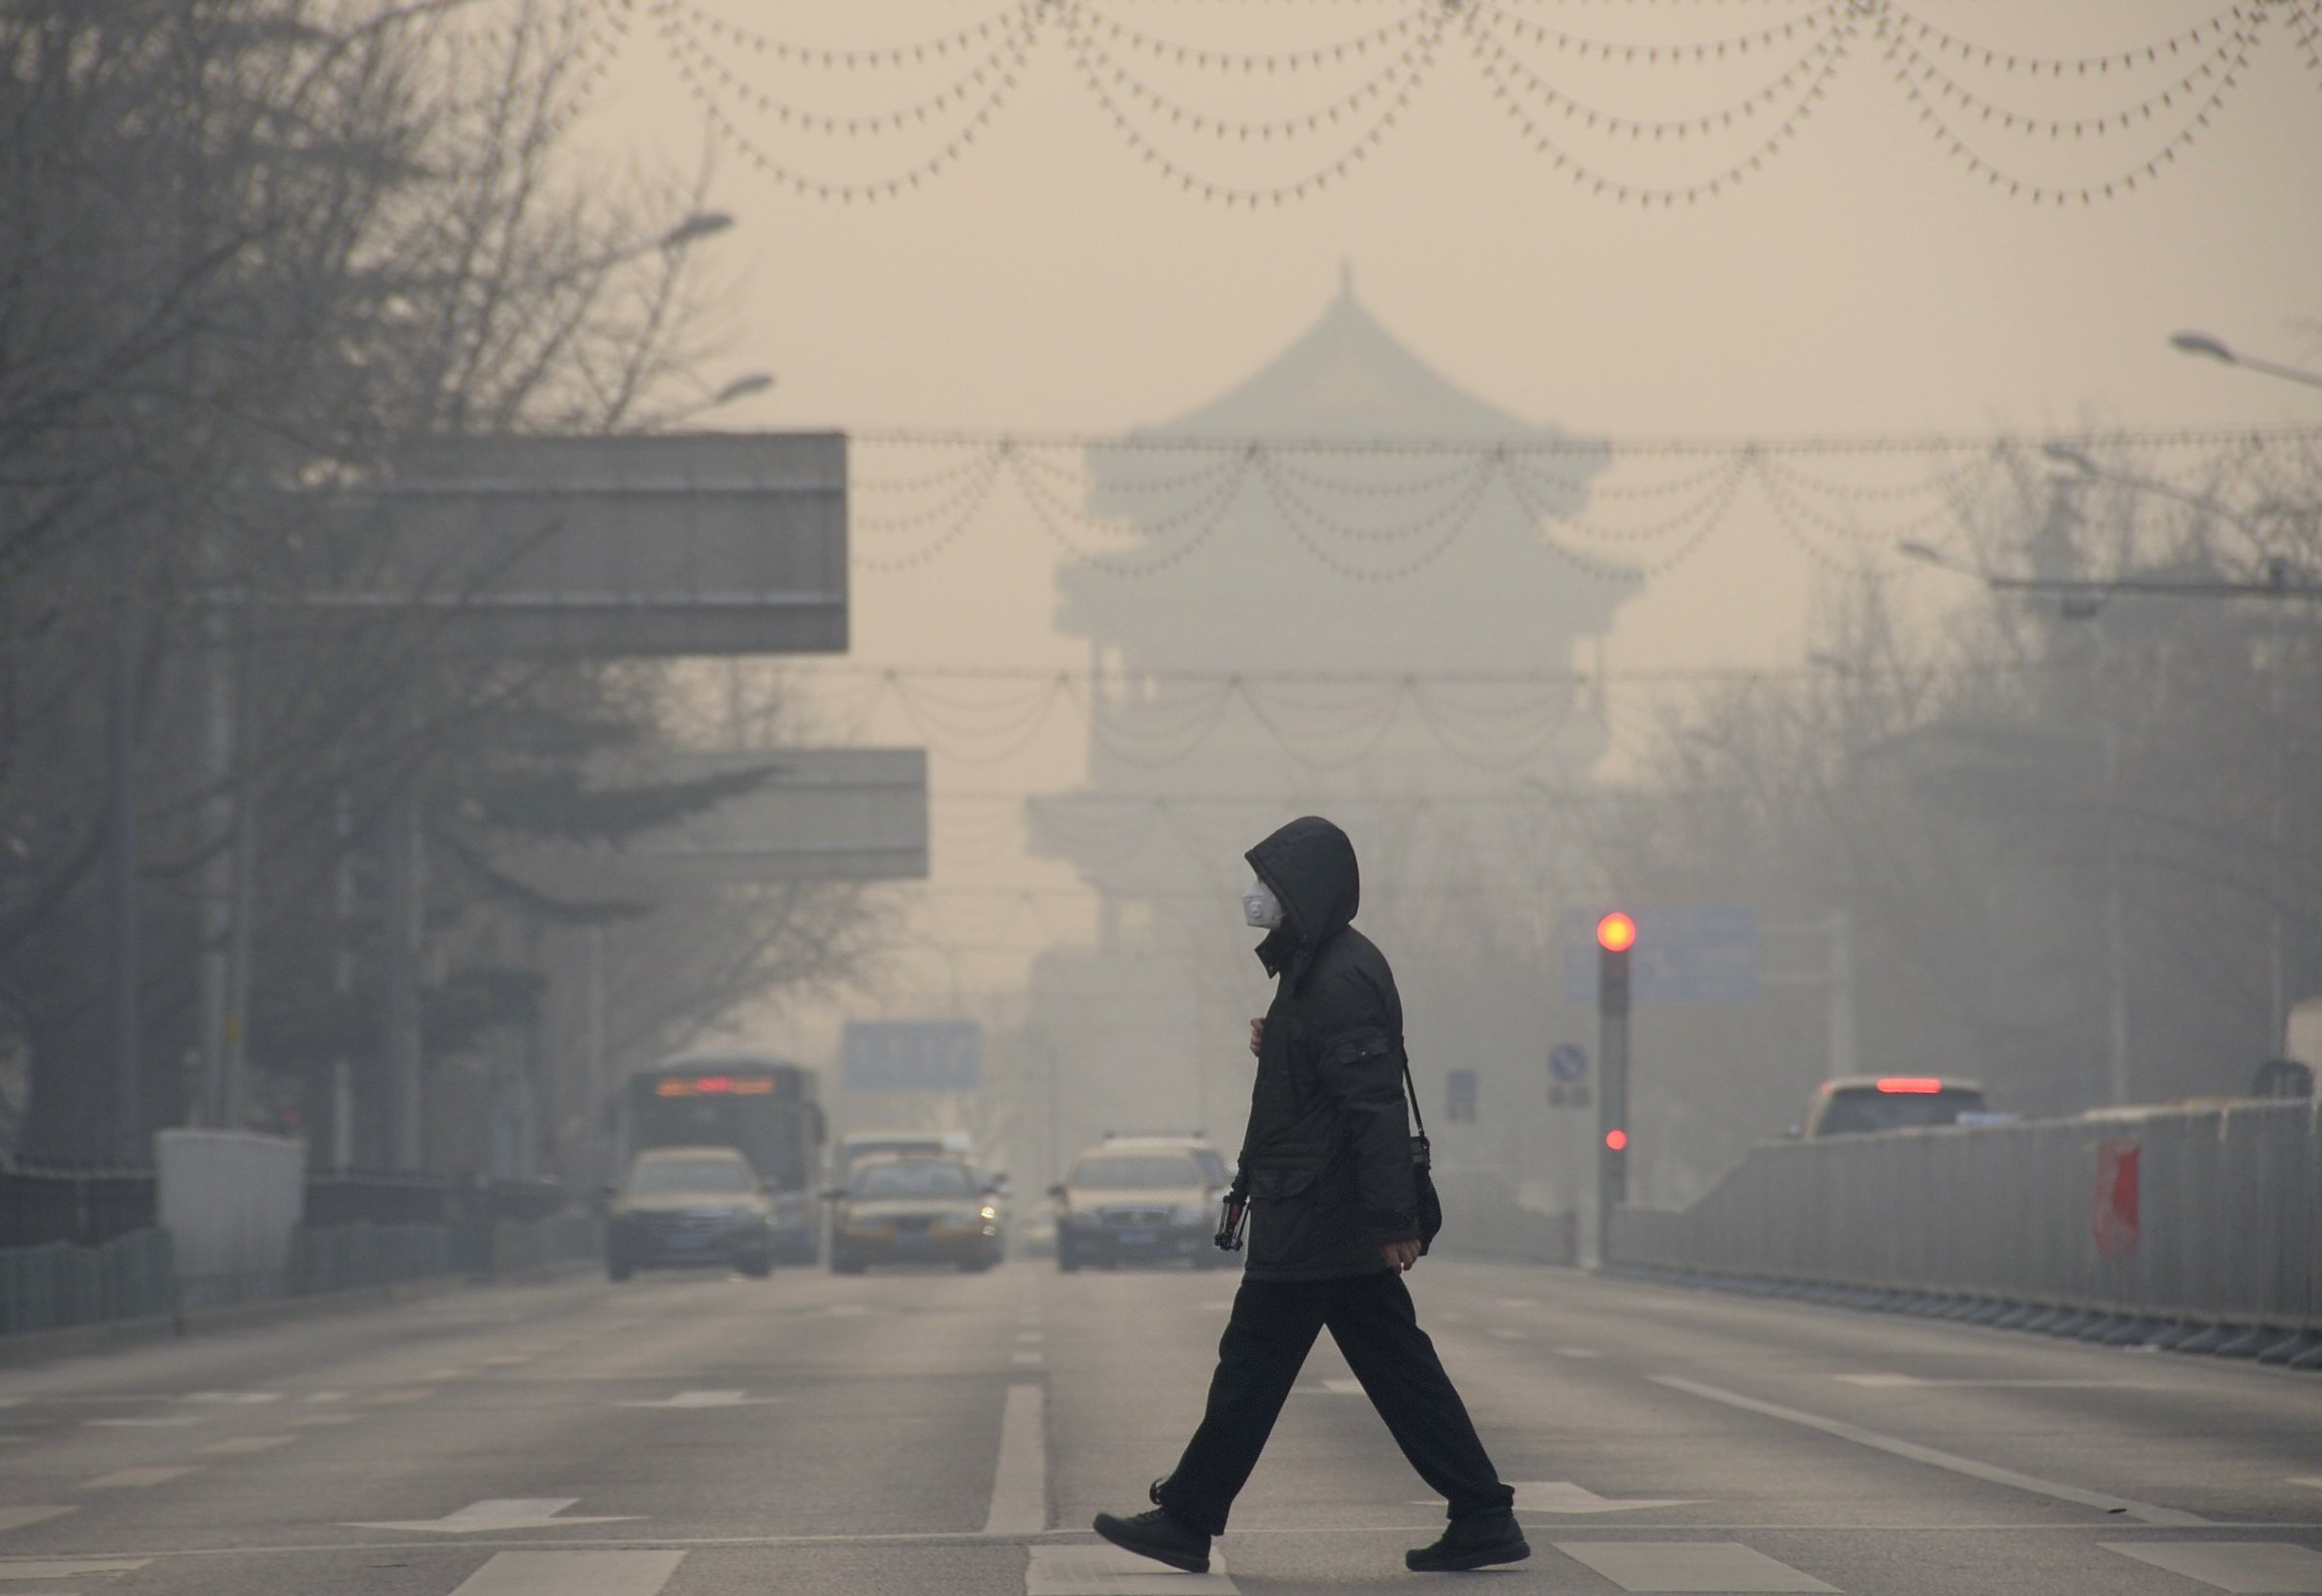 BEIJING, Dec. 29, 2015-- A pedestrian walks amid heavy smog in Beijing, capital of China, Dec. 29, 2015. A blue alert for heavy air pollution was issued by Beijing municipal emergency response headquarters. Beijing has been bothered by heavy pollution since the winter came. (Xinhua/Wu Wei)